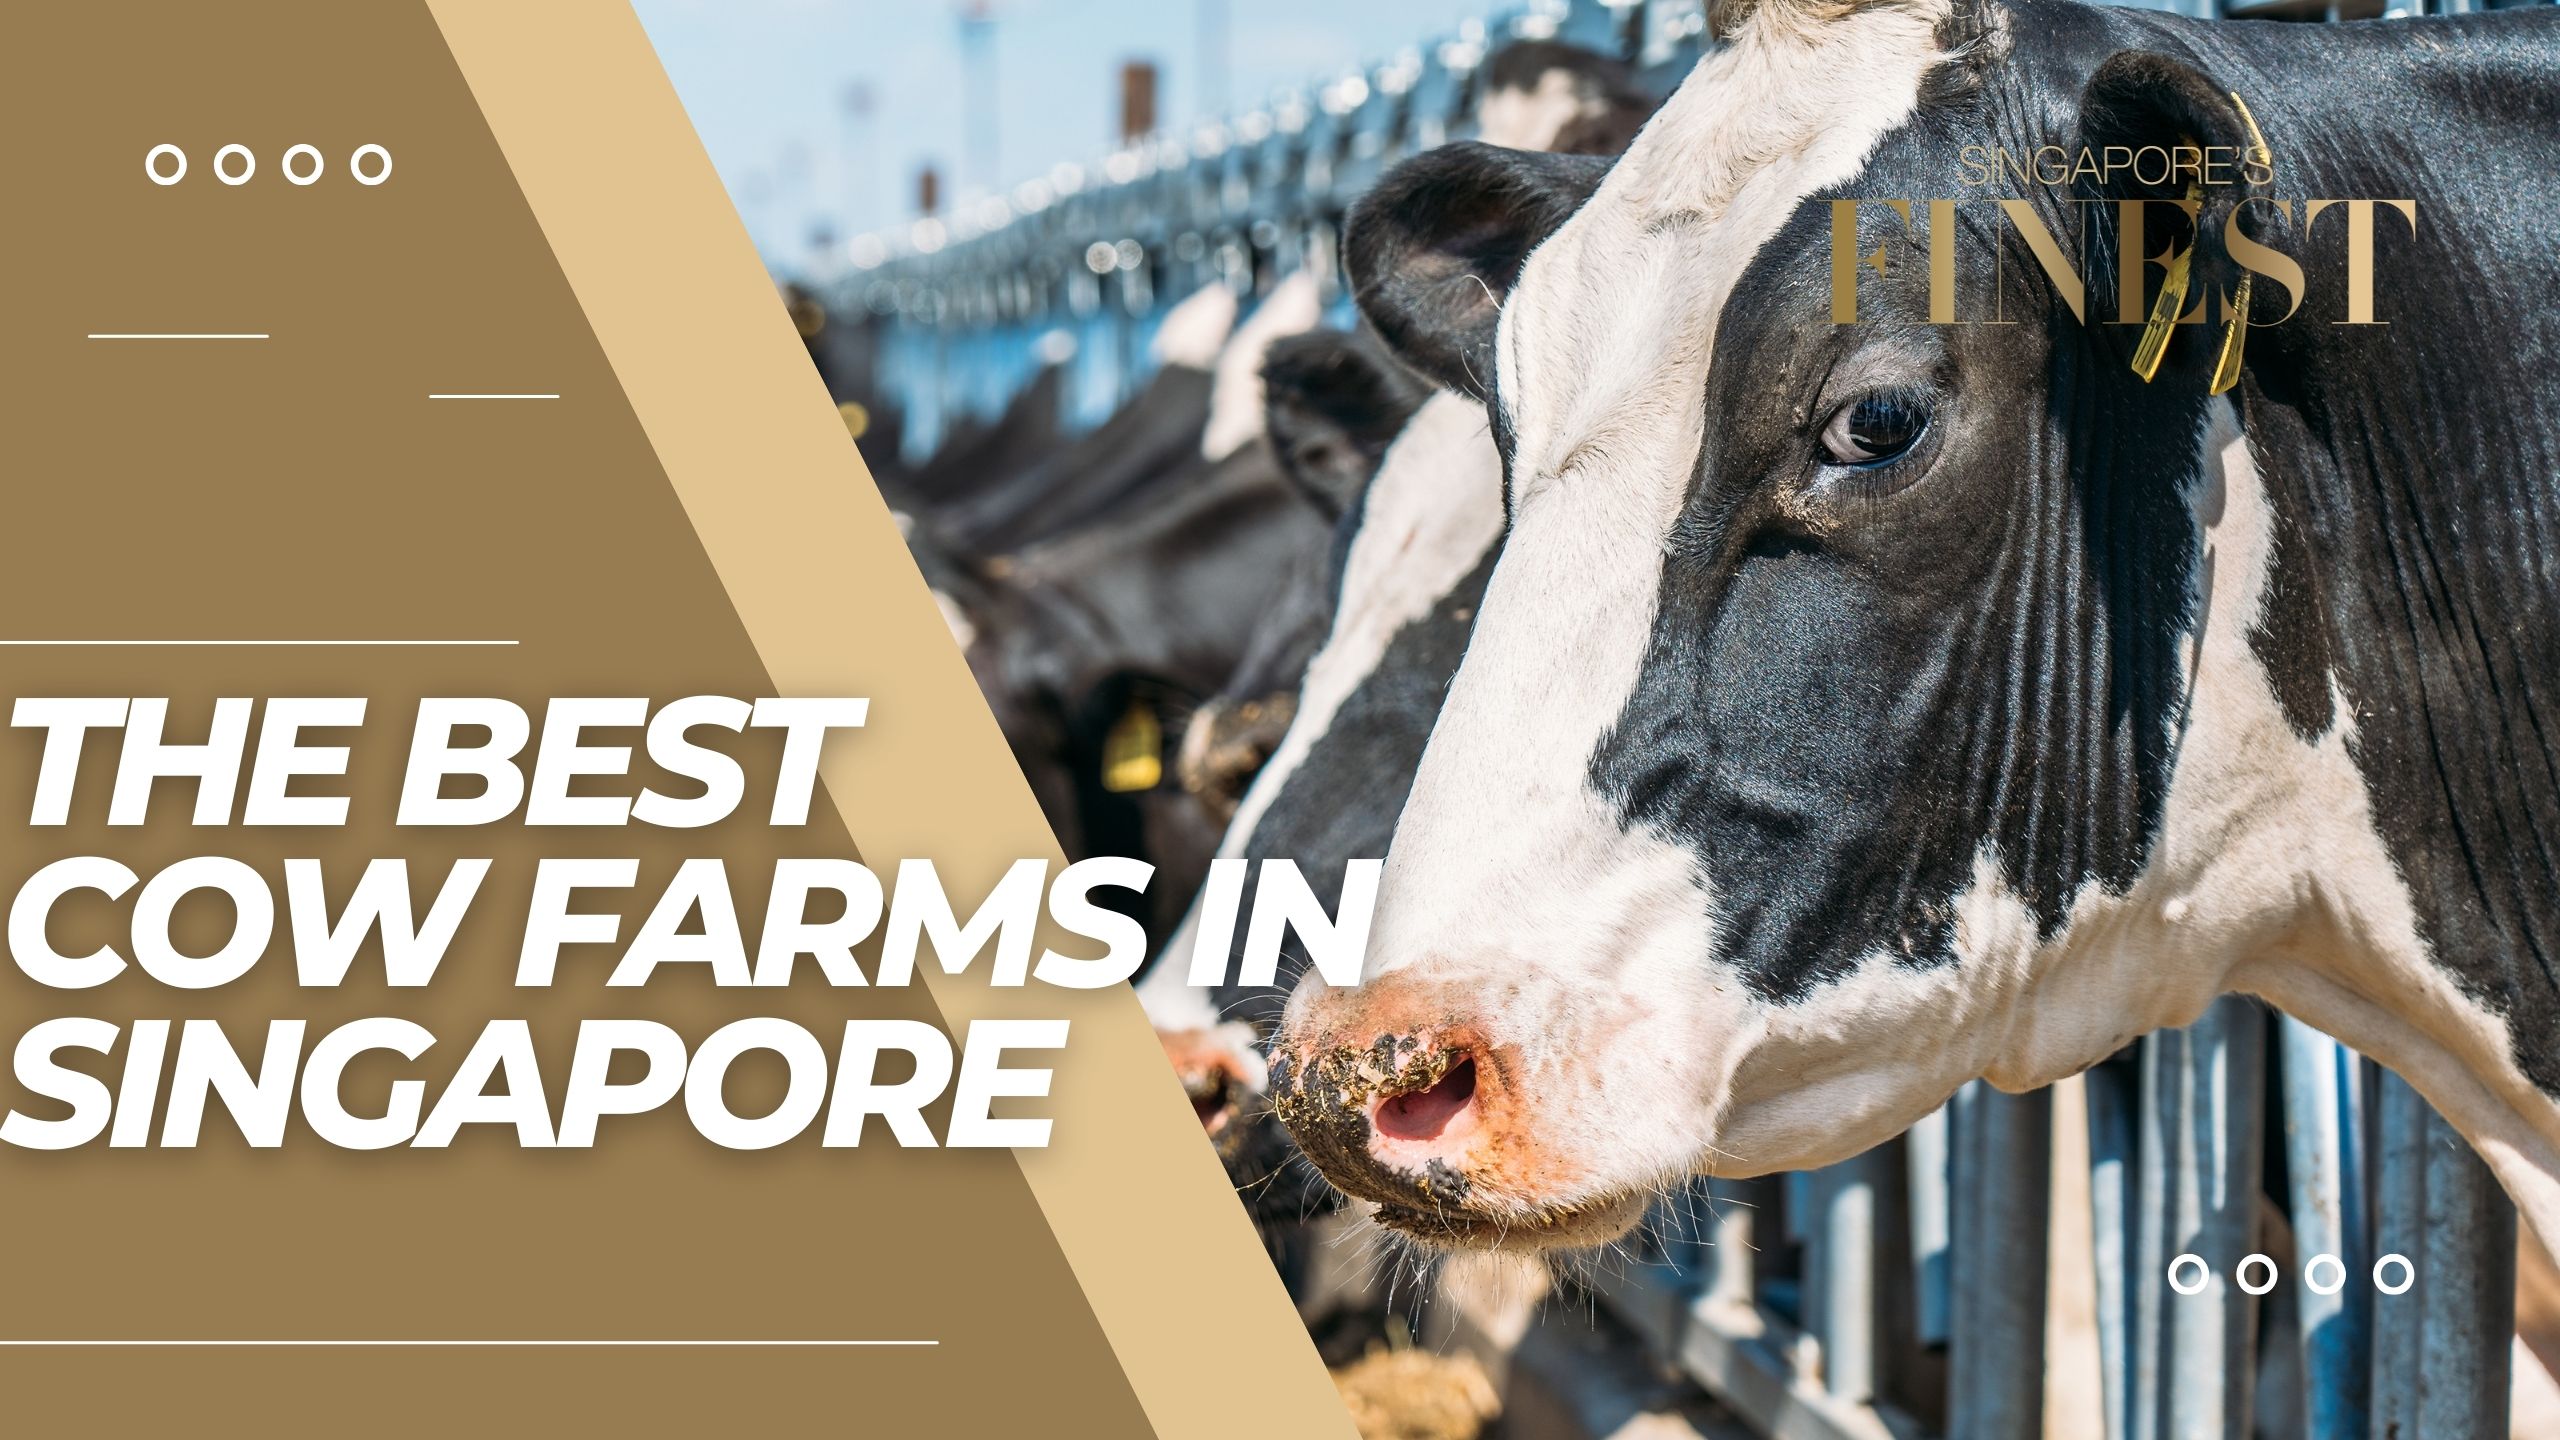 The Finest Cow Farms in Singapore